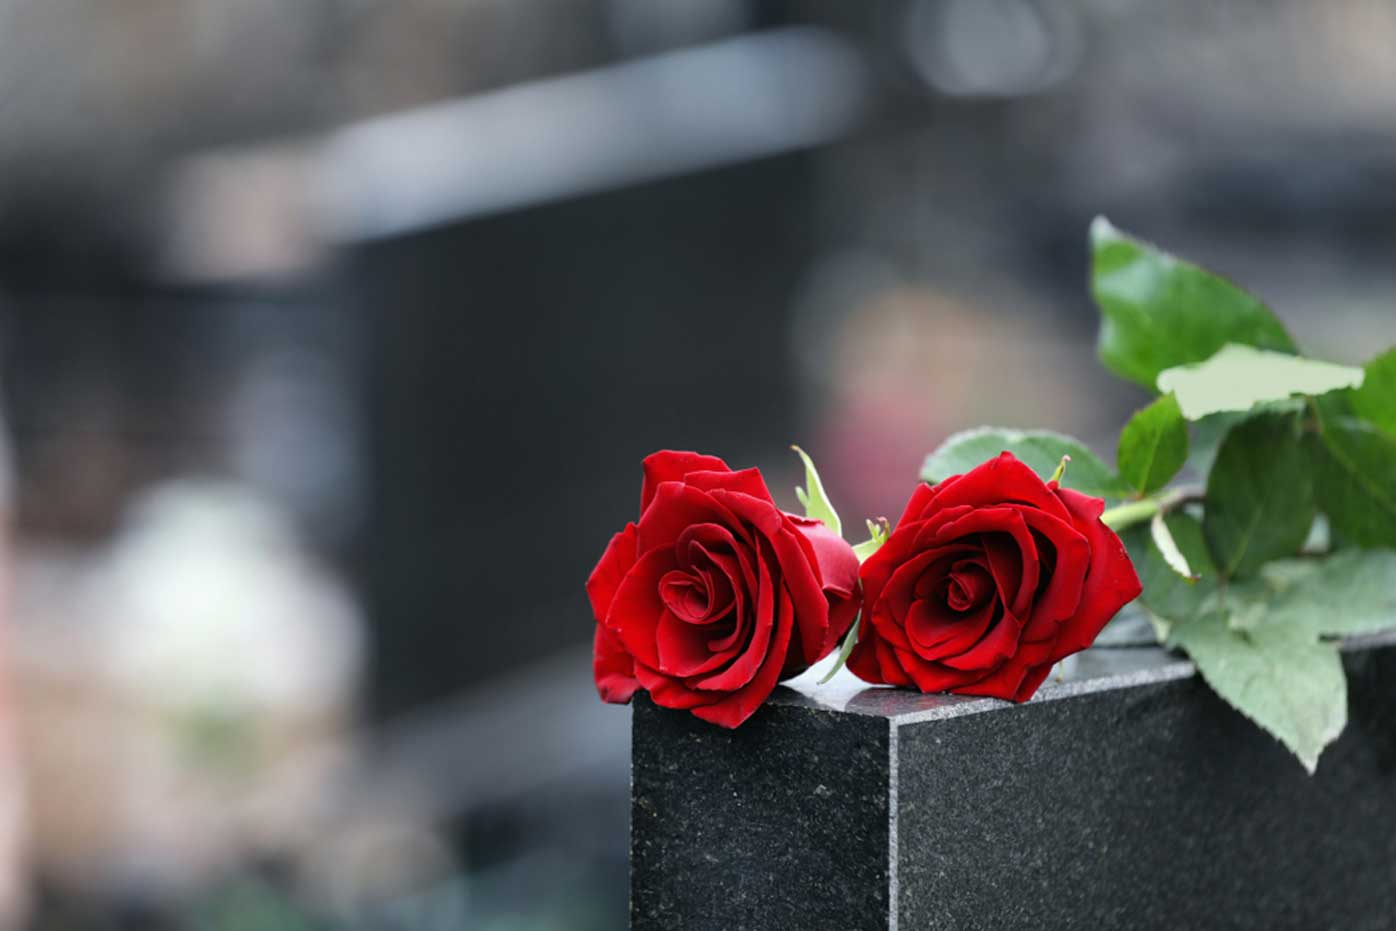 A pair of roses rest on headstones in a graveyard